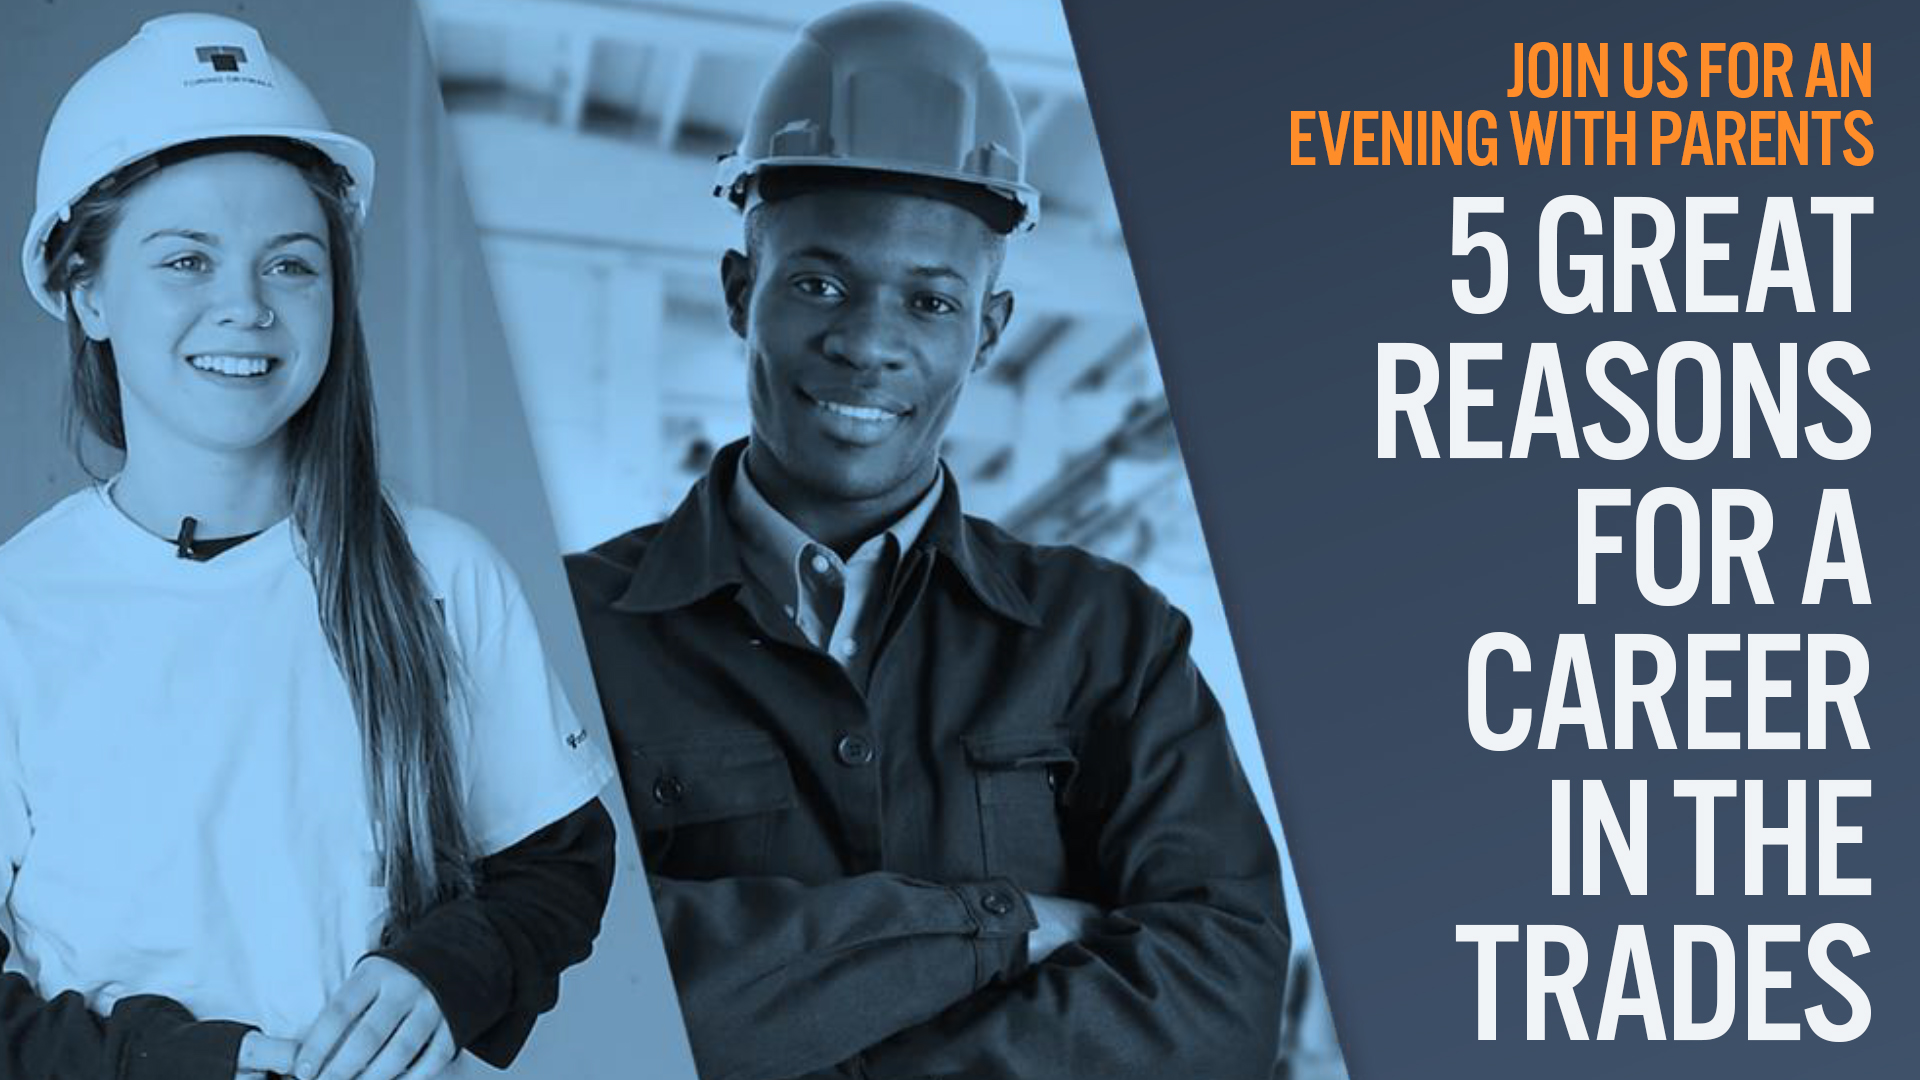 5 Great Reasons for a Career in the Trades